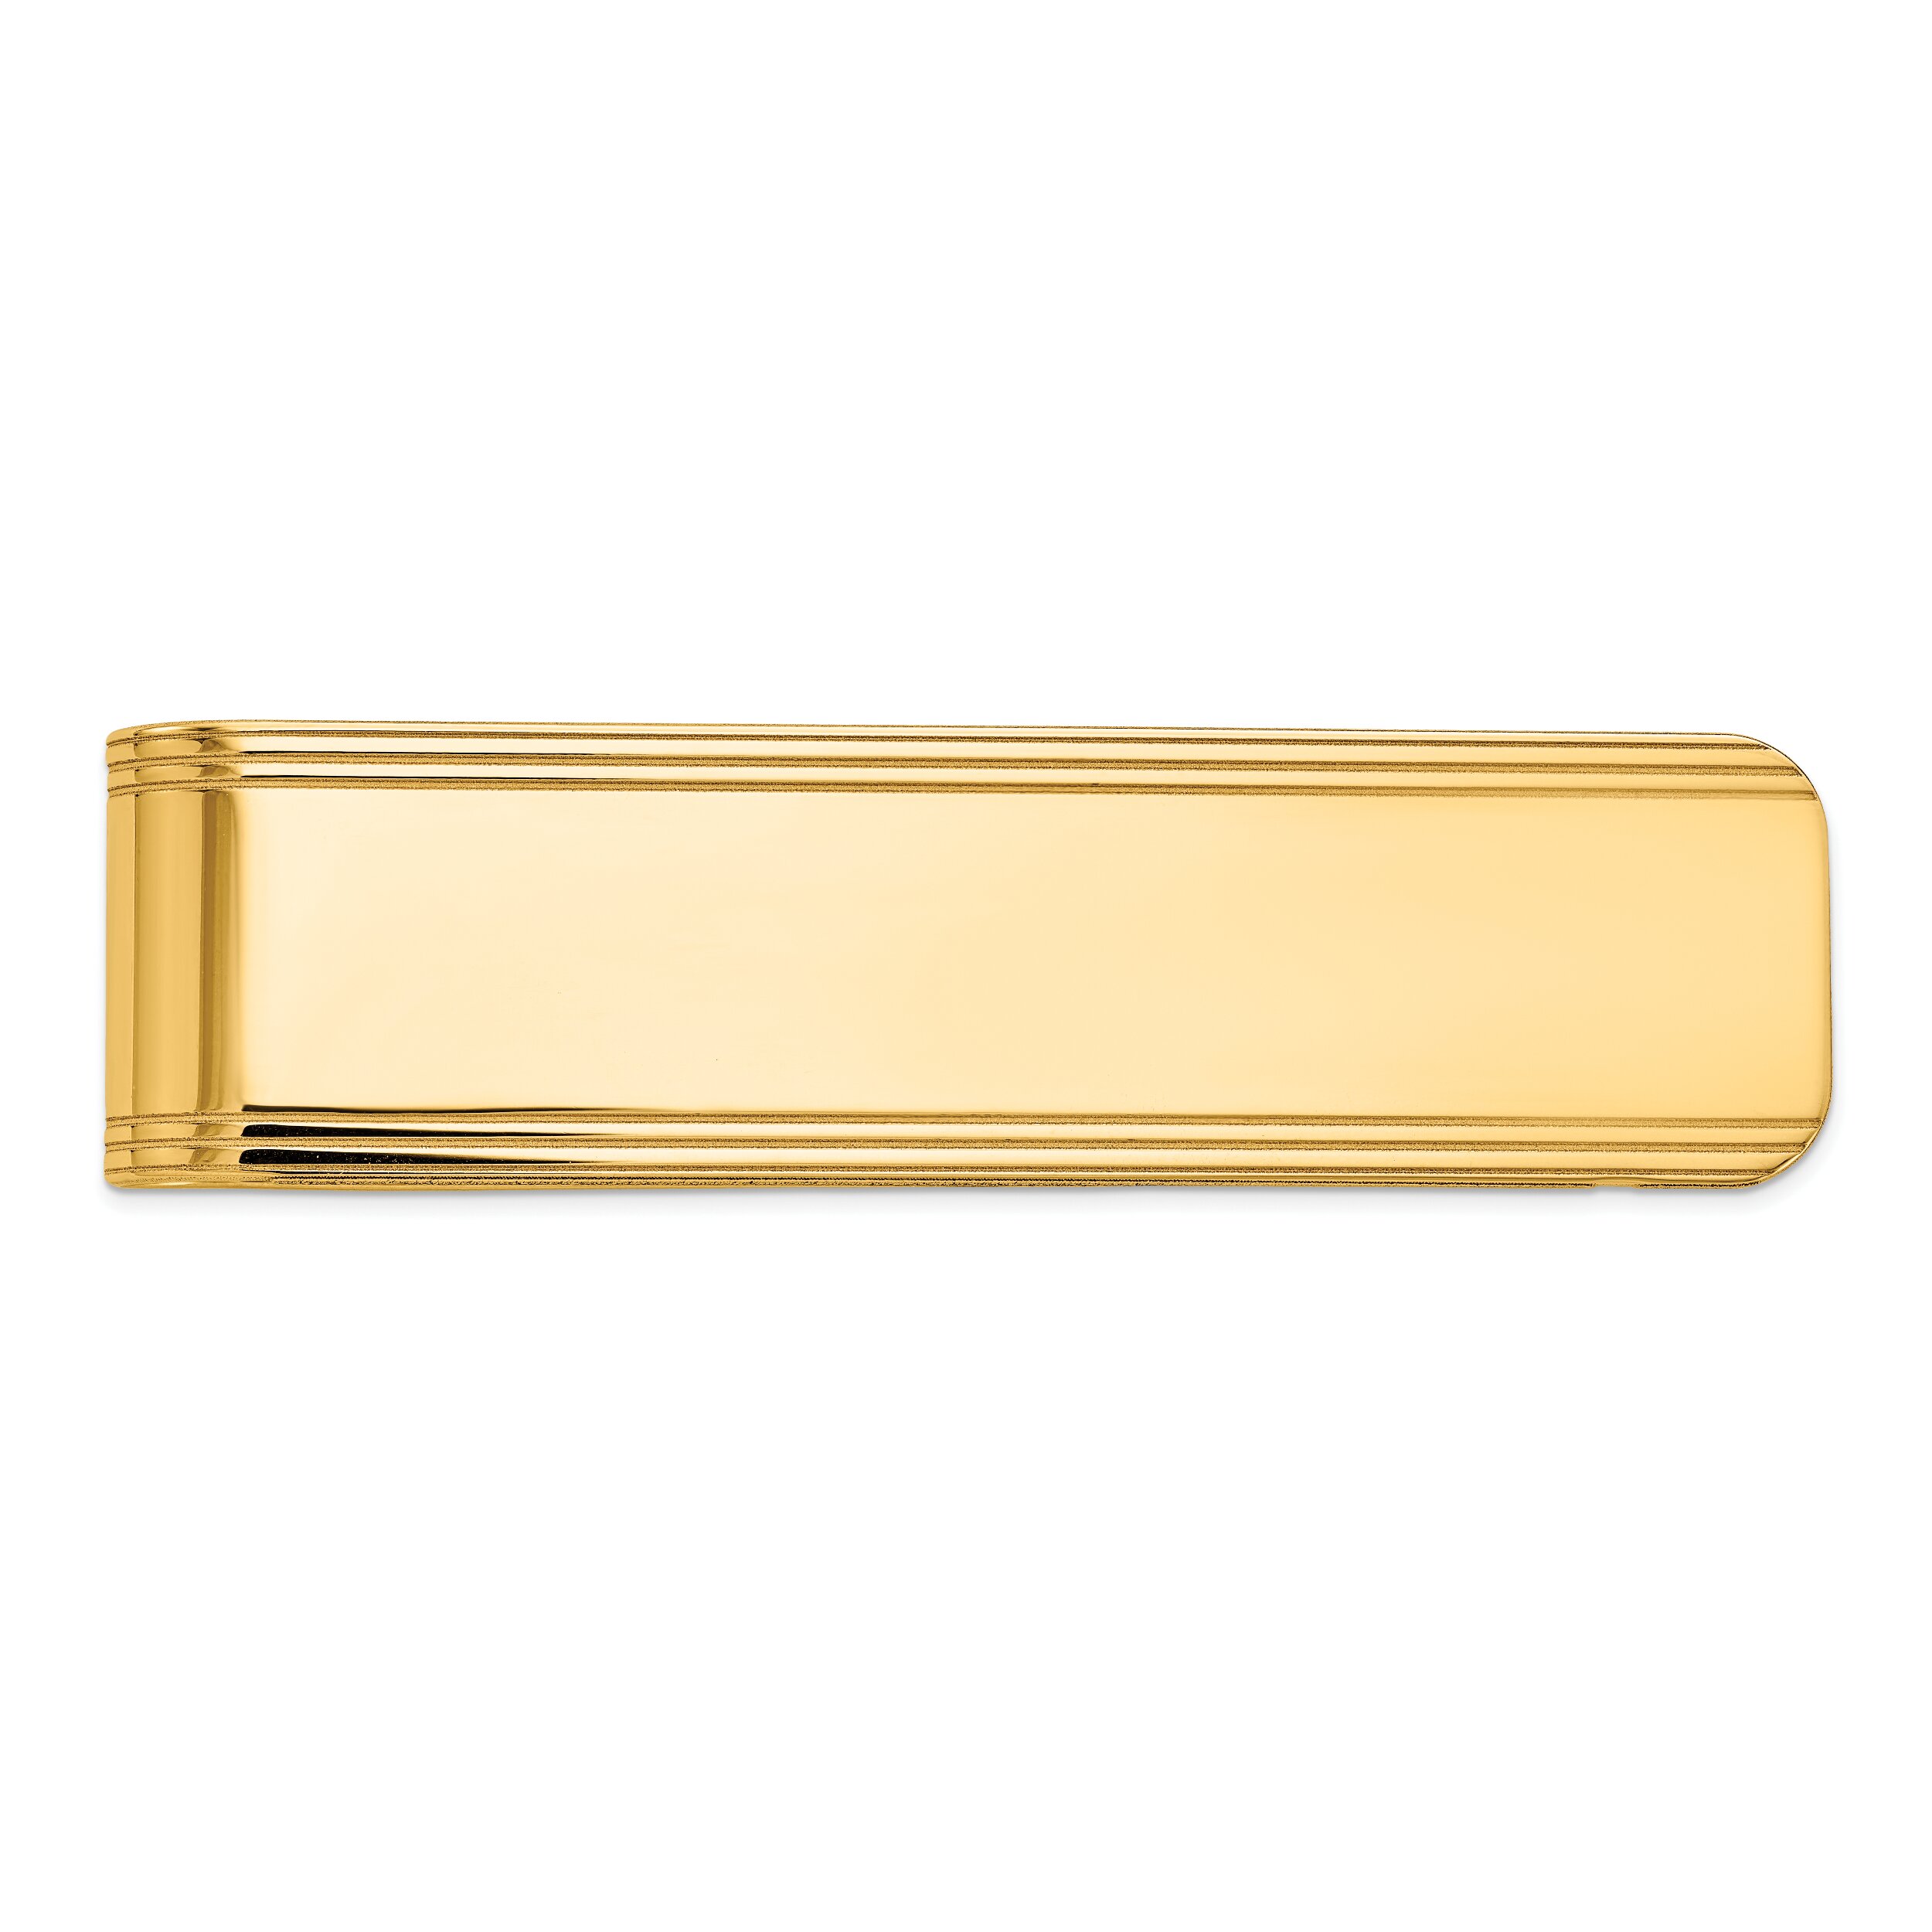 Findingking 14K Yellow Gold Money Clip Polished Mens Jewelry